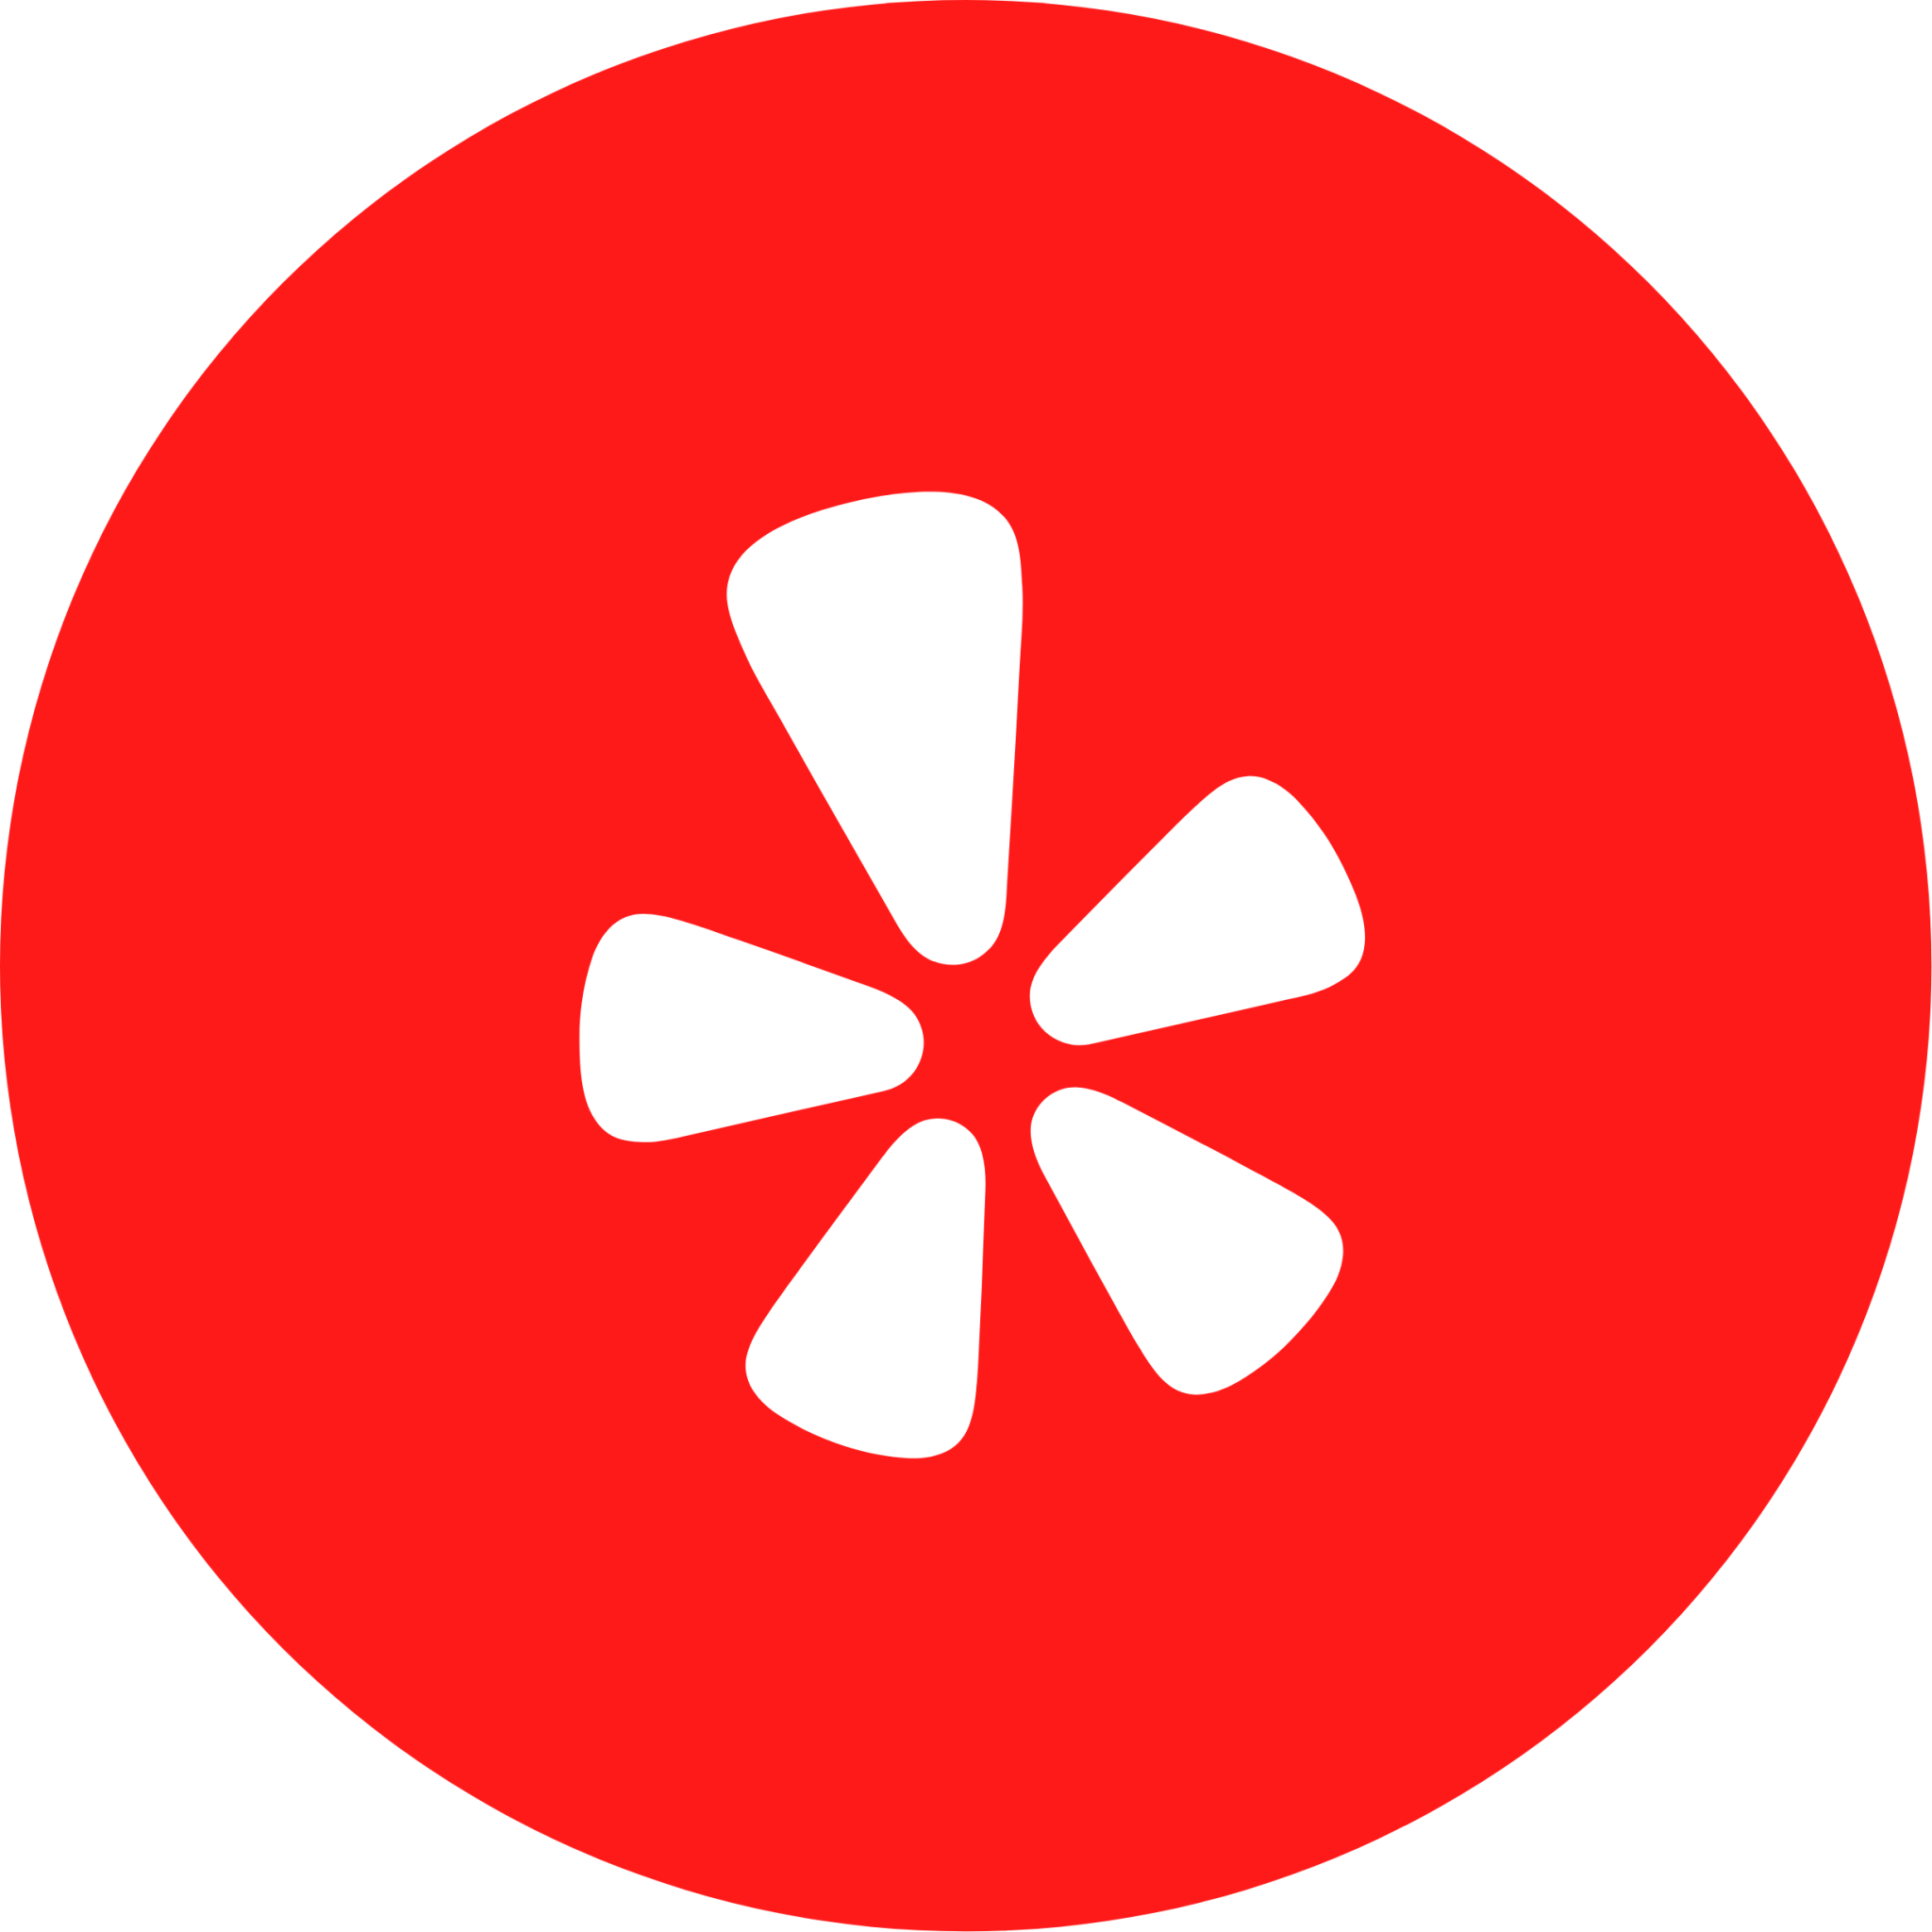 Yelp AI assistant